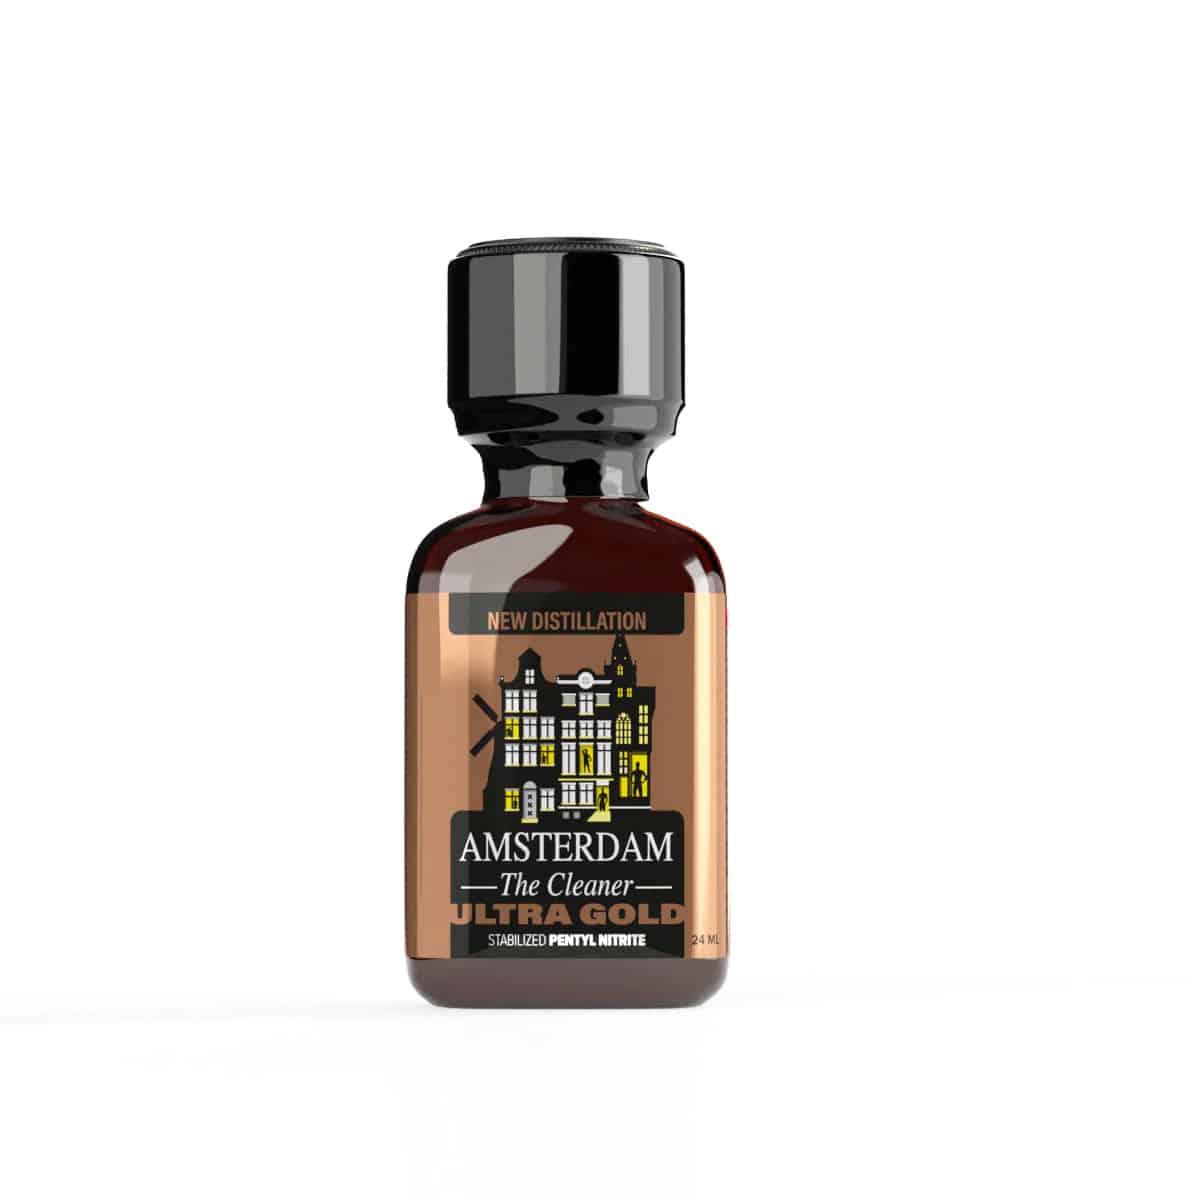 A small bottle labeled "Jungle Juice Platinum 24ml" featuring a cityscape design on the label sits against a white background, suggesting a premium product, possibly a fragrance or a specialty